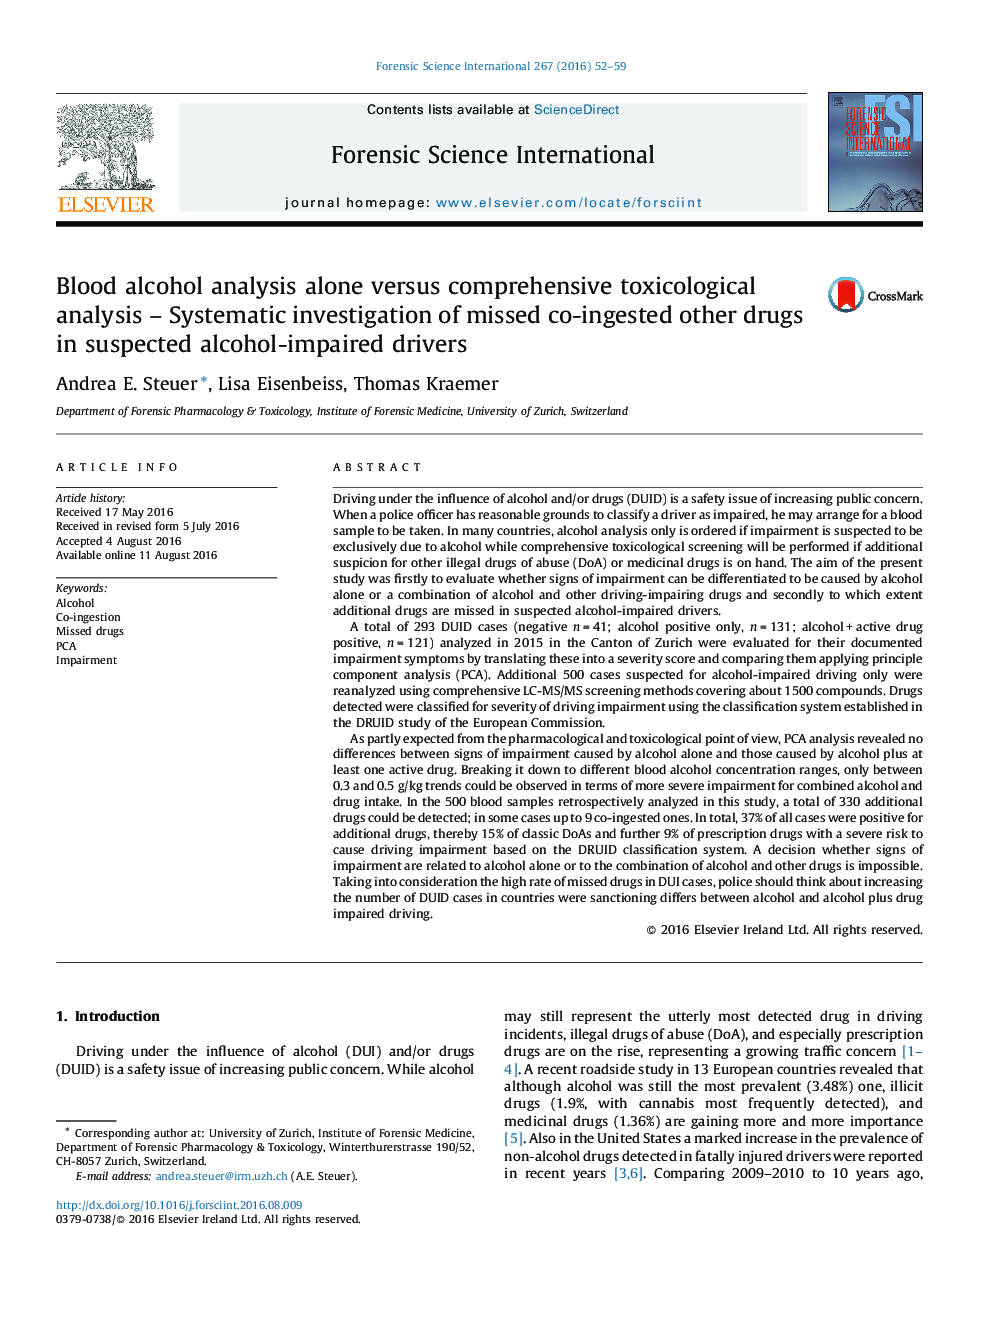 Blood alcohol analysis alone versus comprehensive toxicological analysis - Systematic investigation of missed co-ingested other drugs in suspected alcohol-impaired drivers